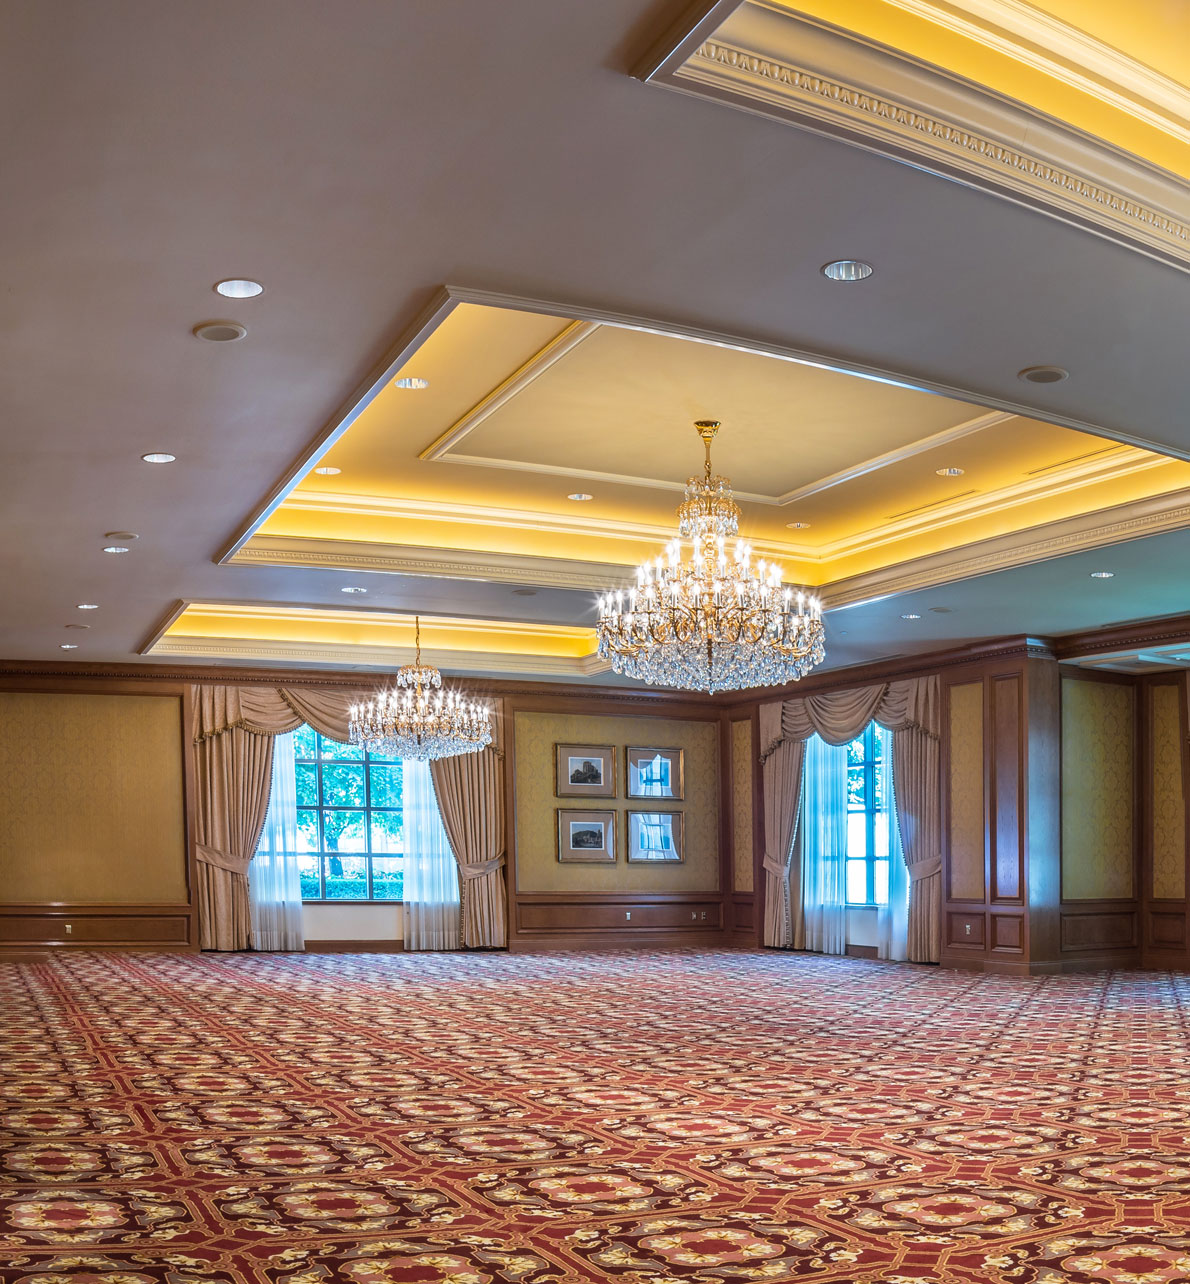 Savoy meeting space at The Grand America Hotel with chandeliers and wood trim.